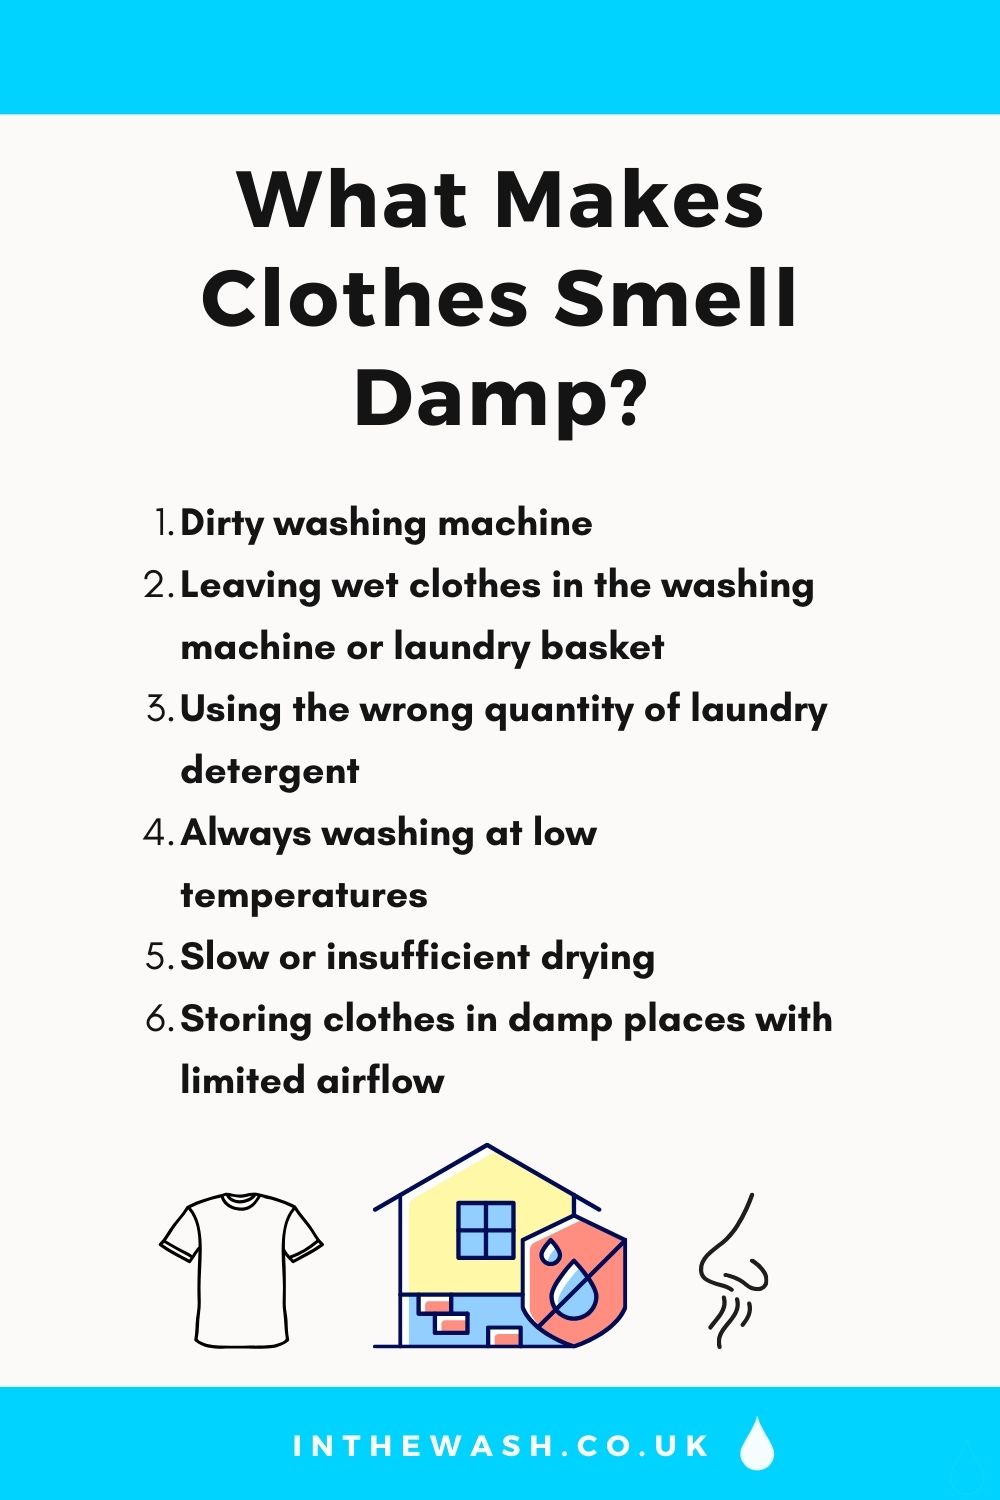 What makes clothes smell damp?